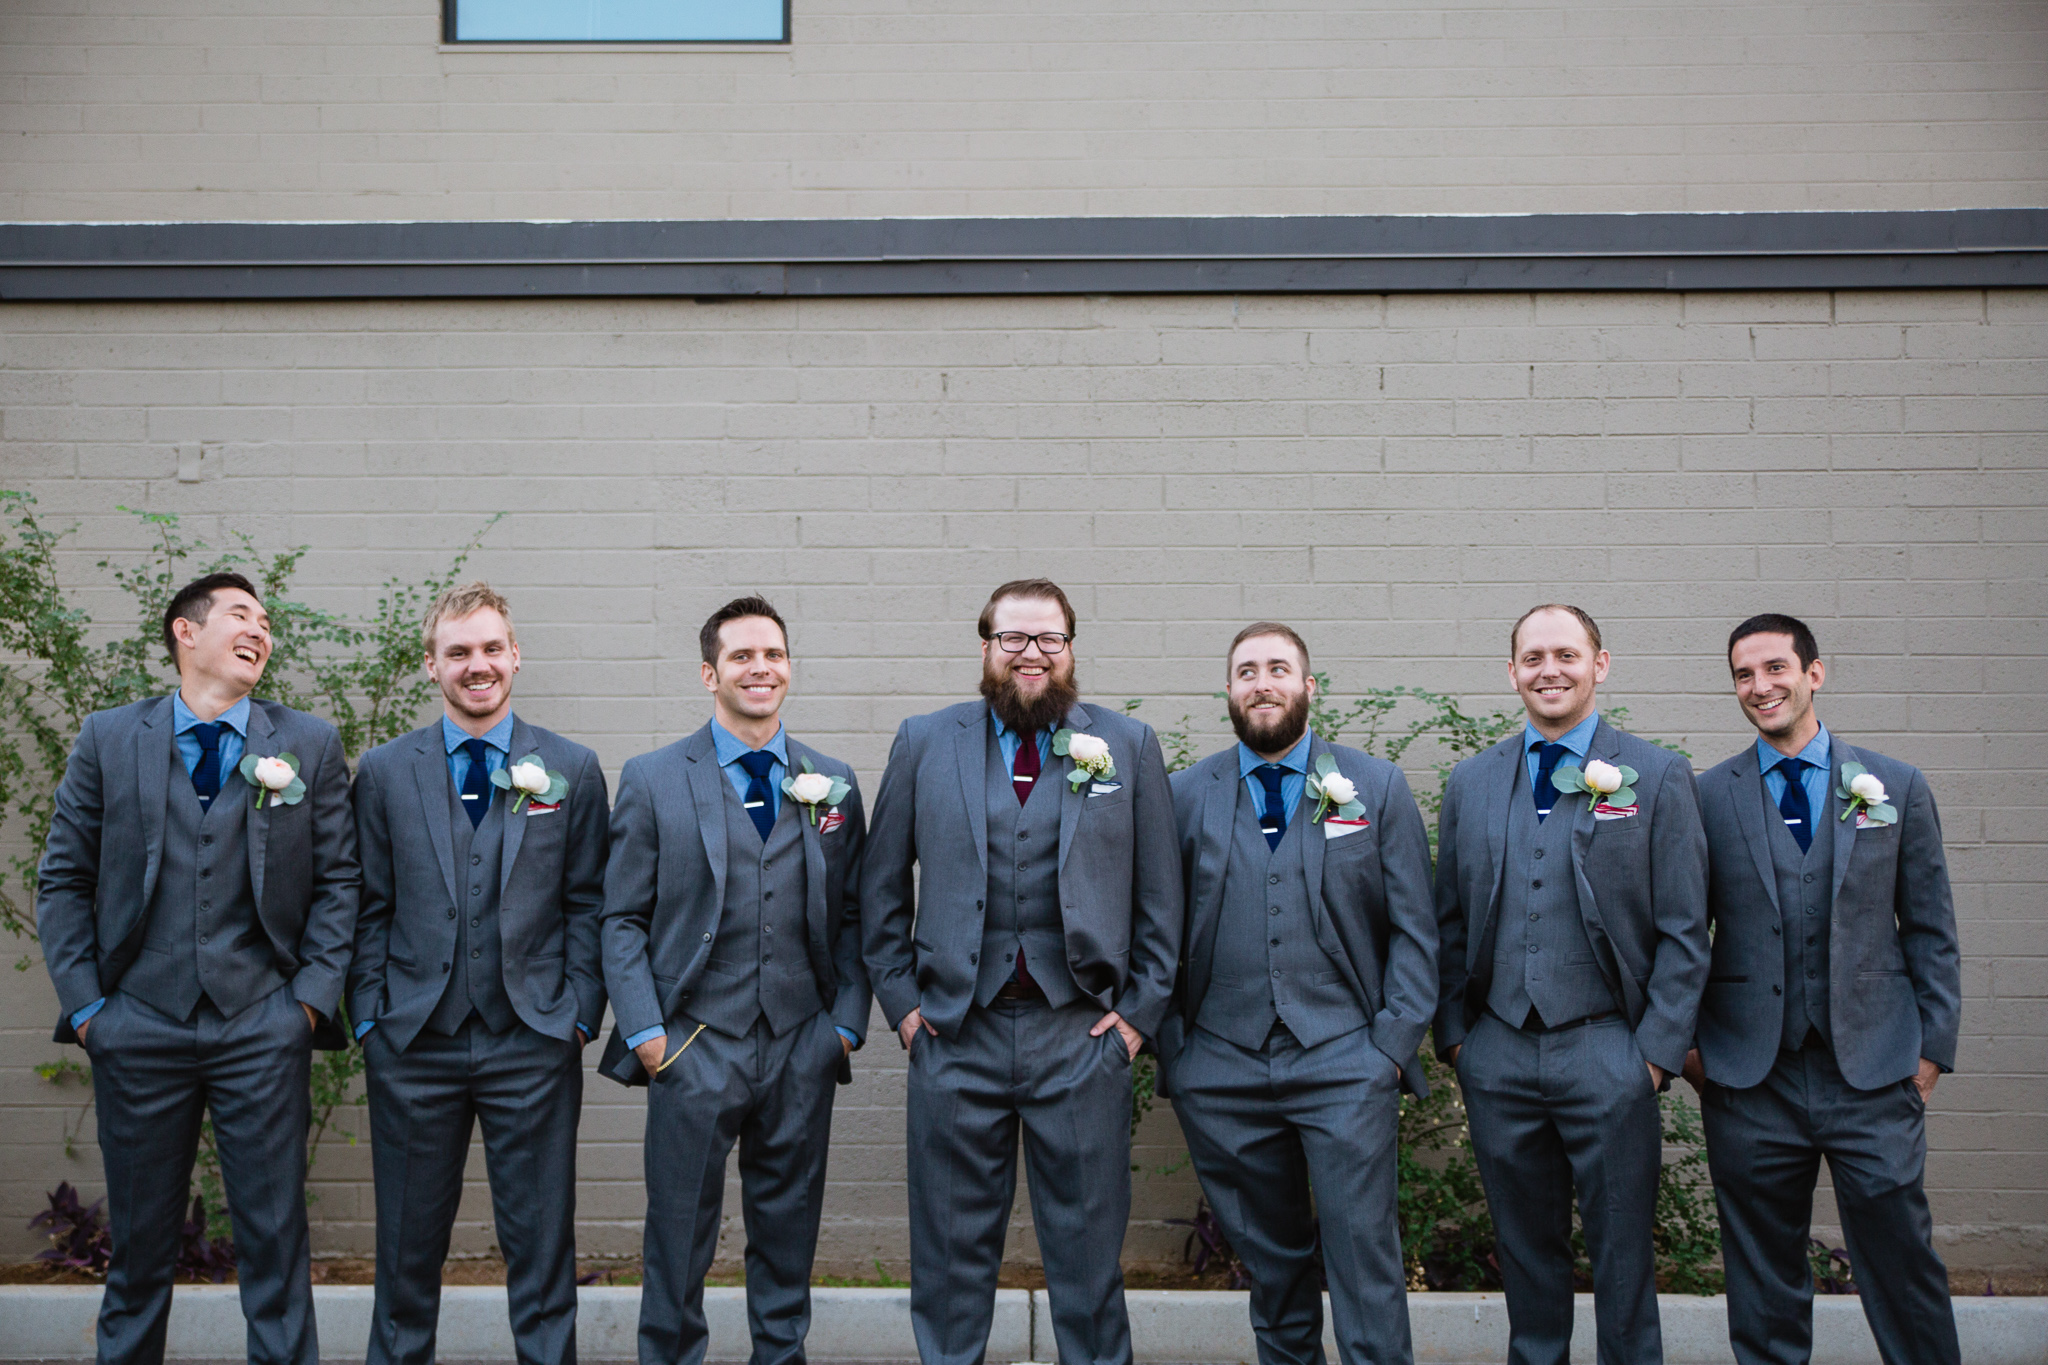 Grey blue and maroon themed groomsmen at a vintage book themed wedding day.